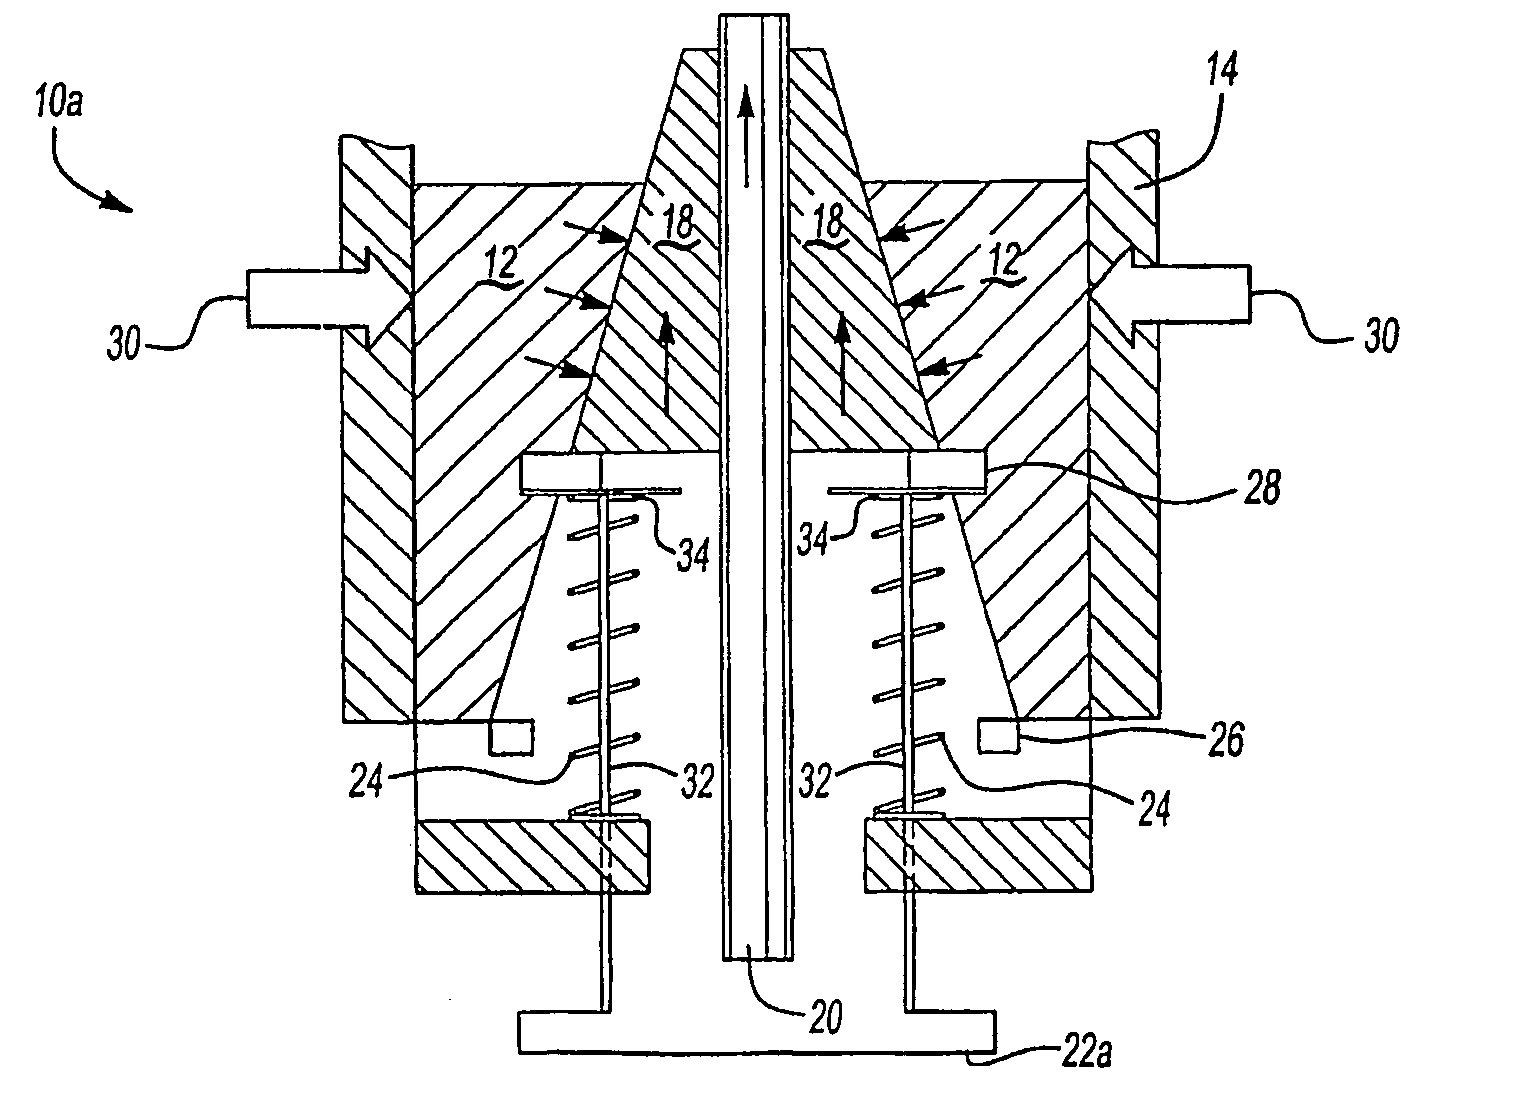 Remotely resettable ropeless emergency stopping device for an elevator